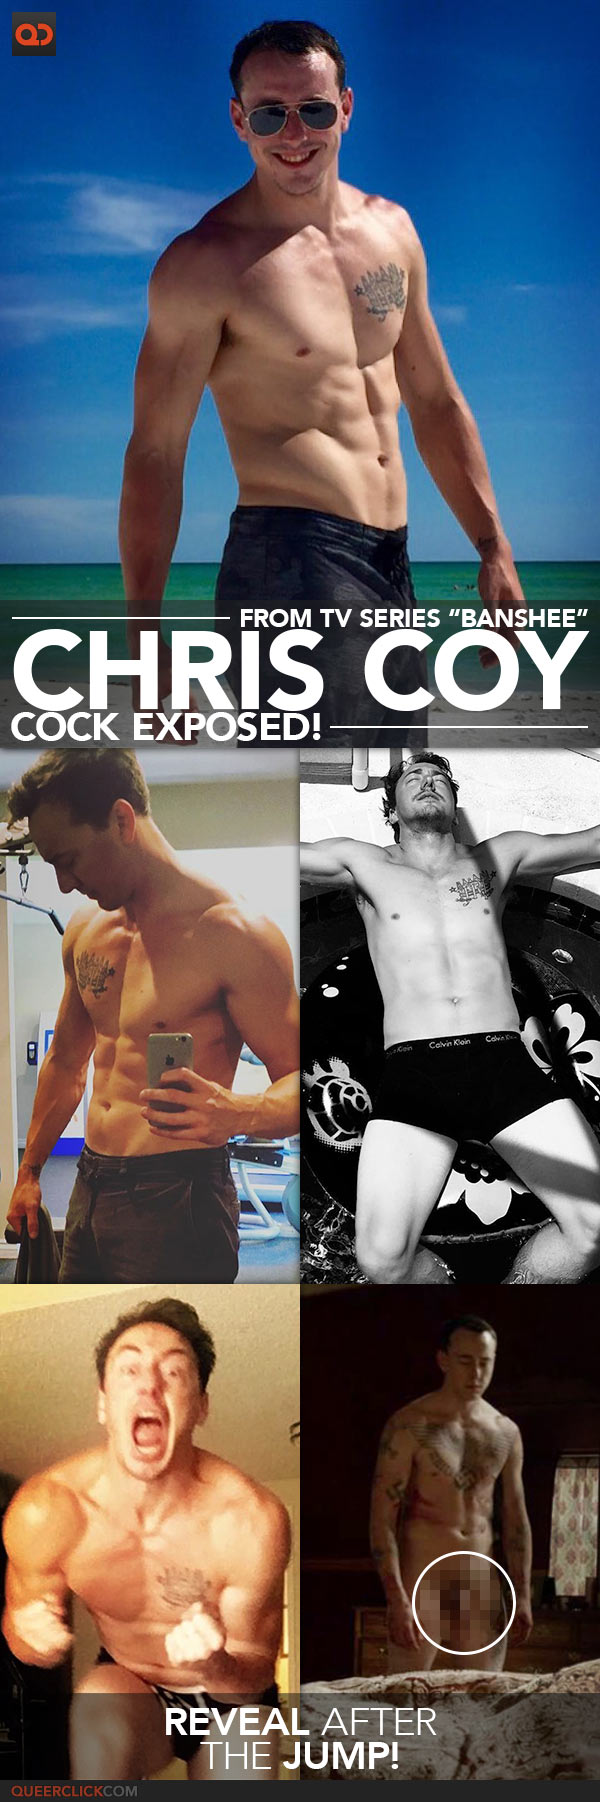 qc-chris_coy_from_tv_show_banshee_cock_exposed-teaser